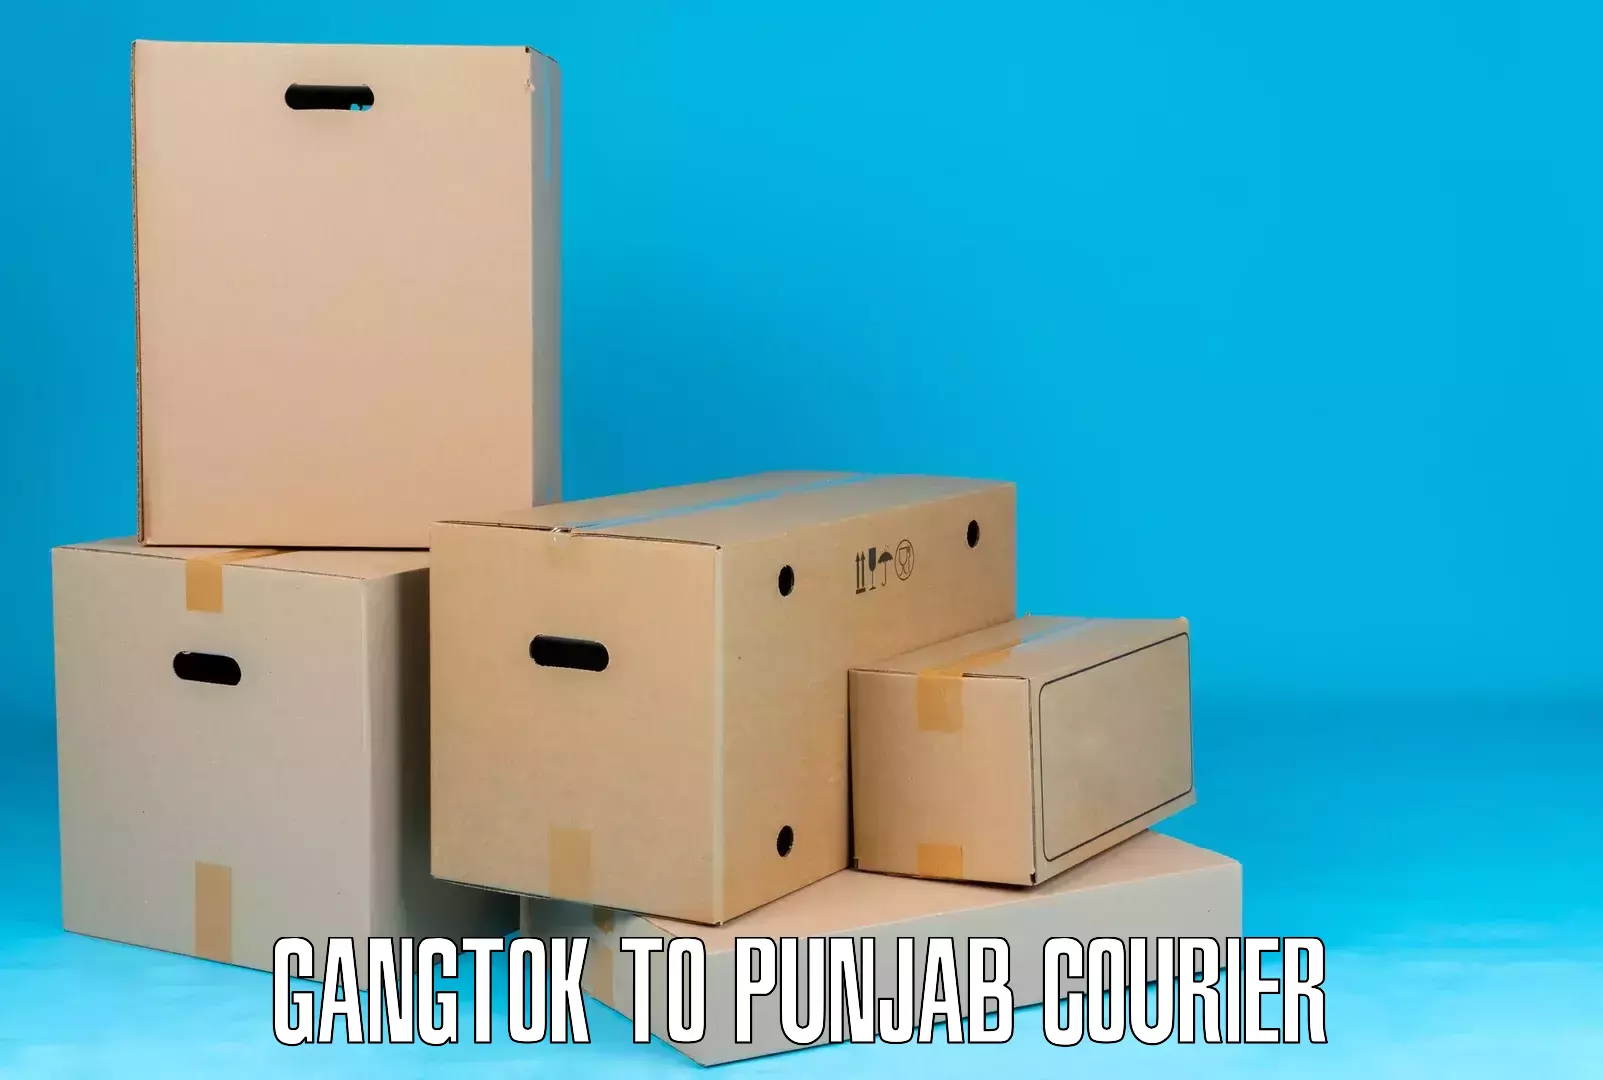 Multi-national courier services Gangtok to Punjab